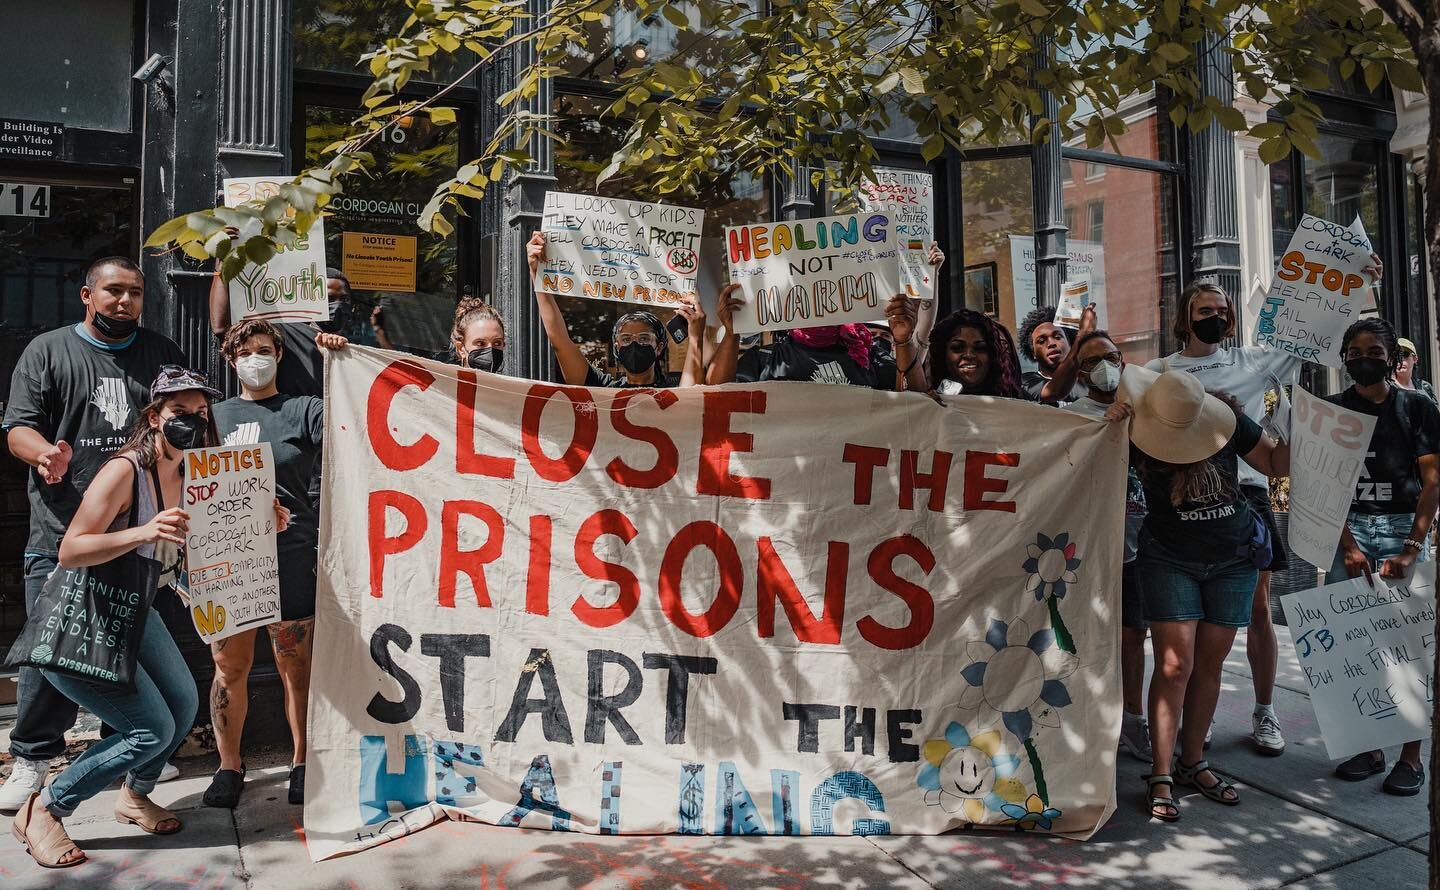 #tbt to our protest a few weeks ago at the office of @cordoganclark, who is contracted by the state to build a new youth prison in Lincoln. Since this day, they have recited IDJJ propaganda to anyone who speaks out against their involvement in this e